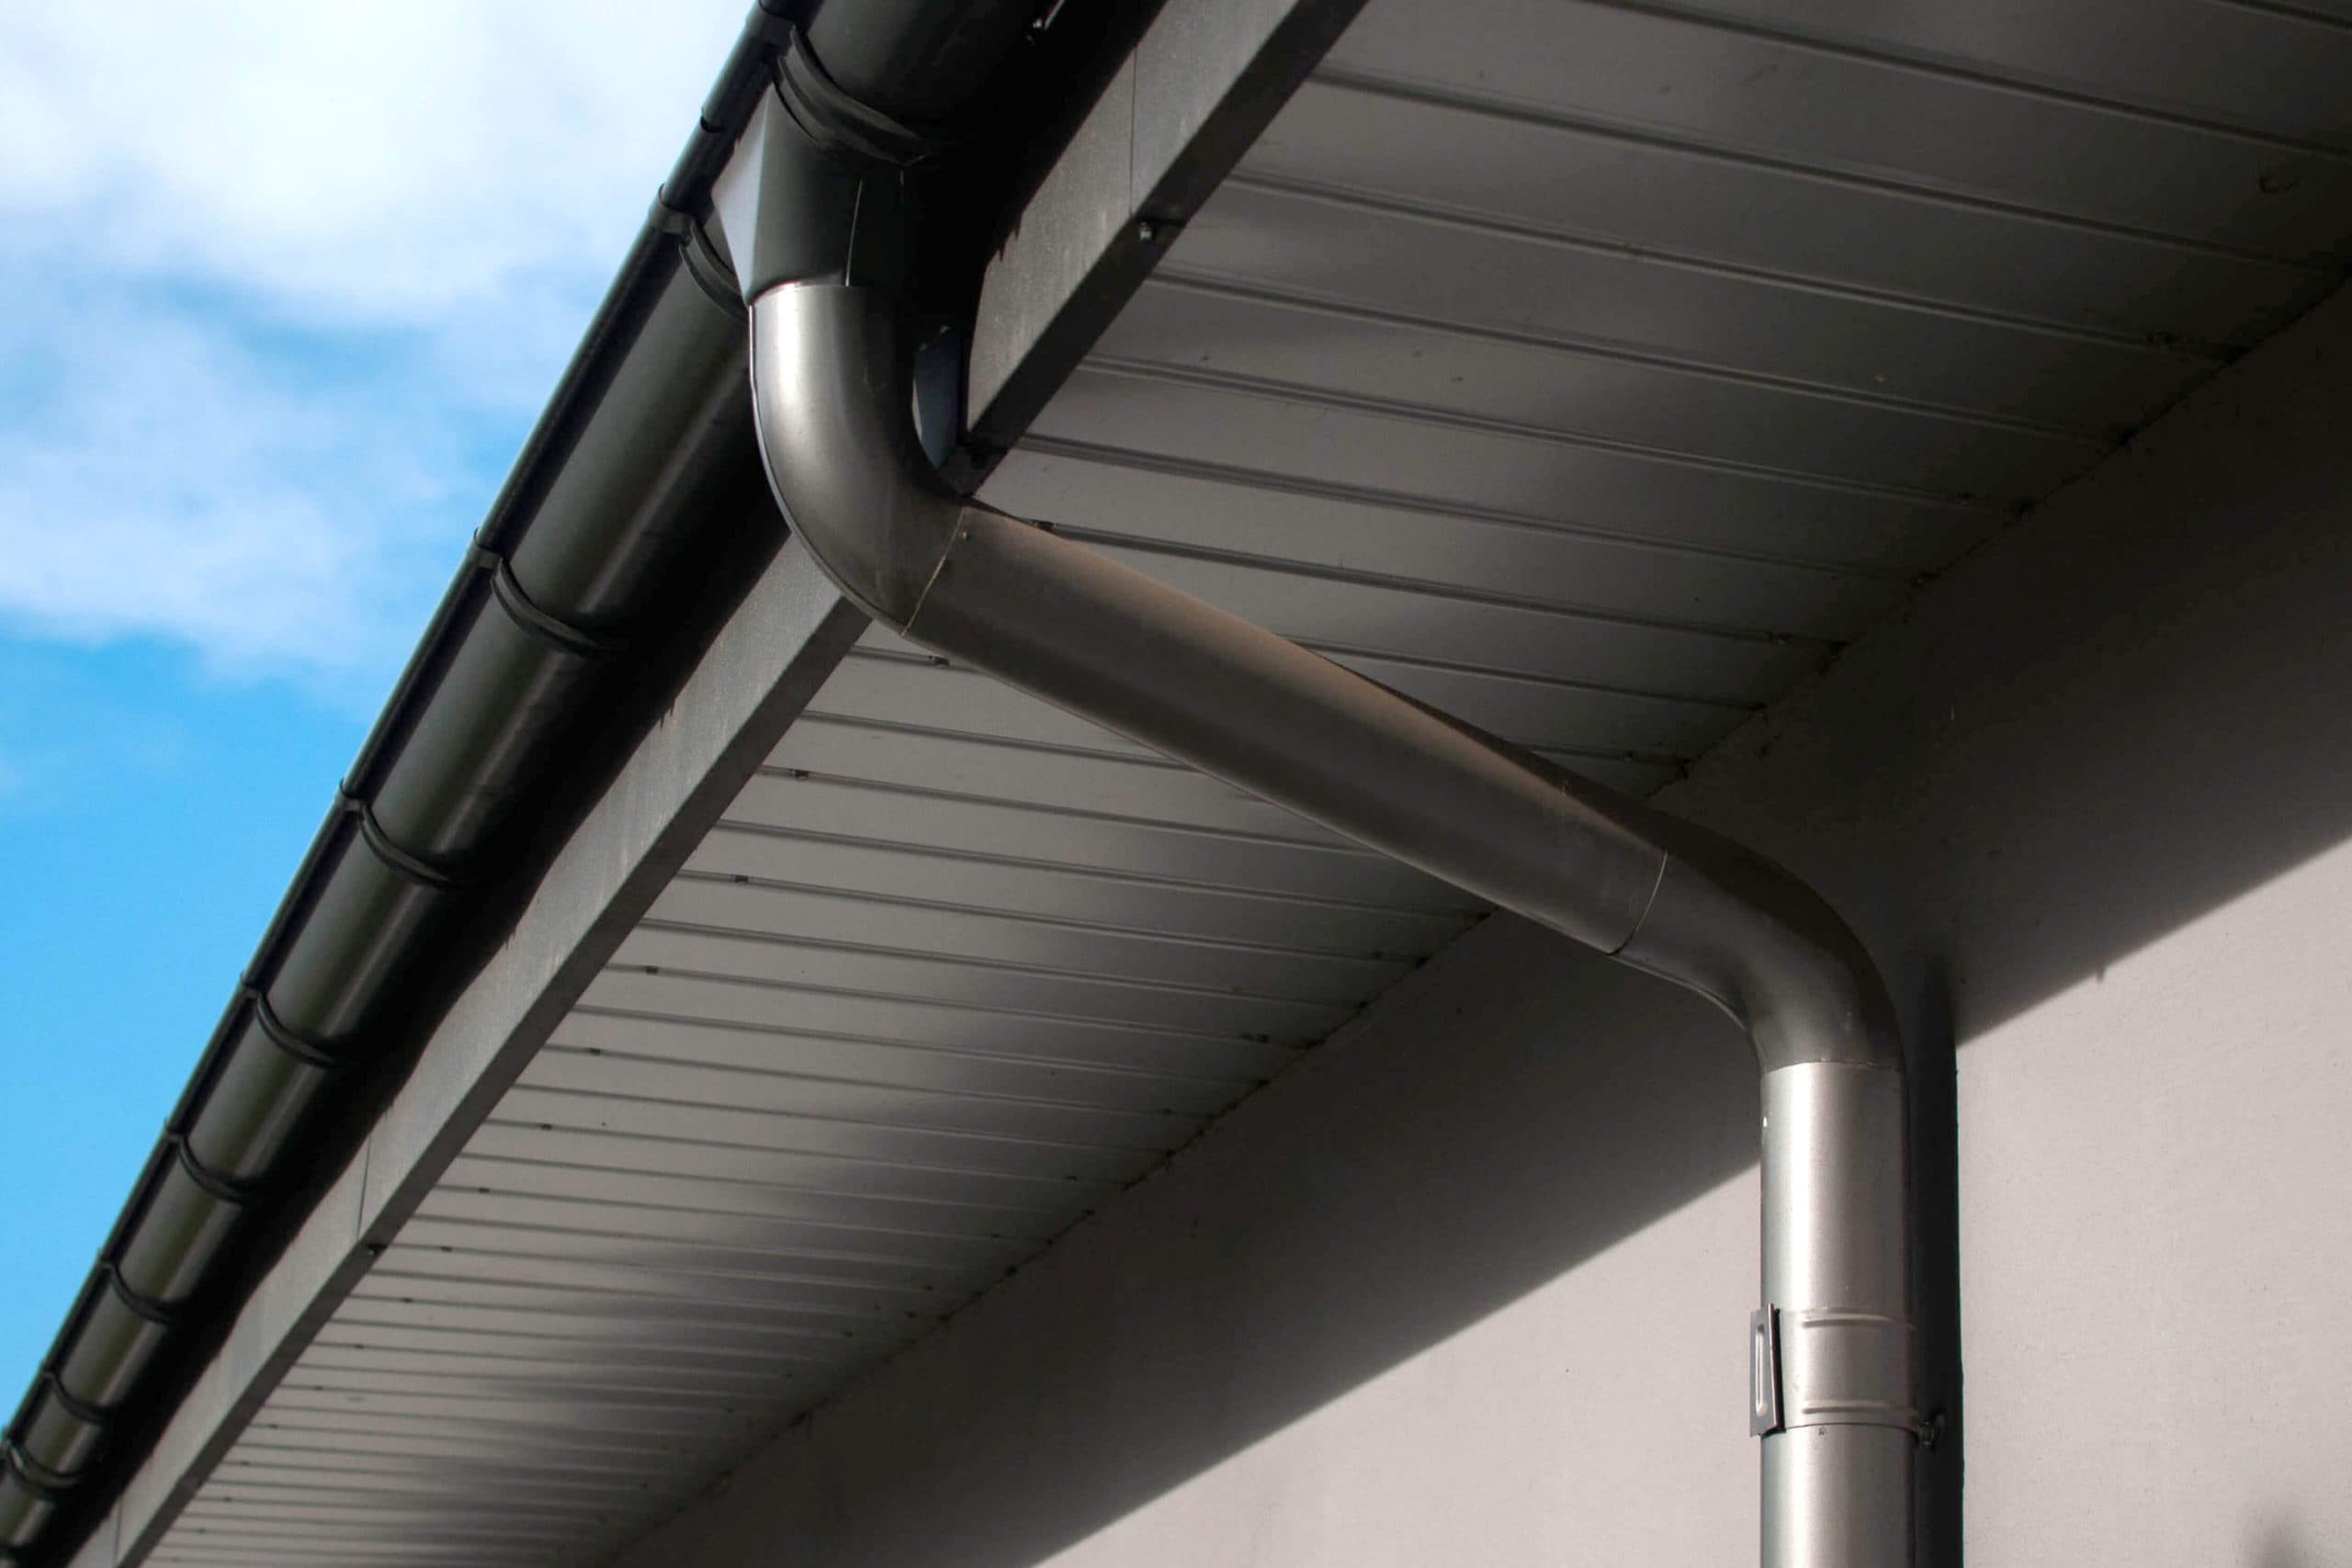 Reliable and affordable Galvanized gutters installation in Miami